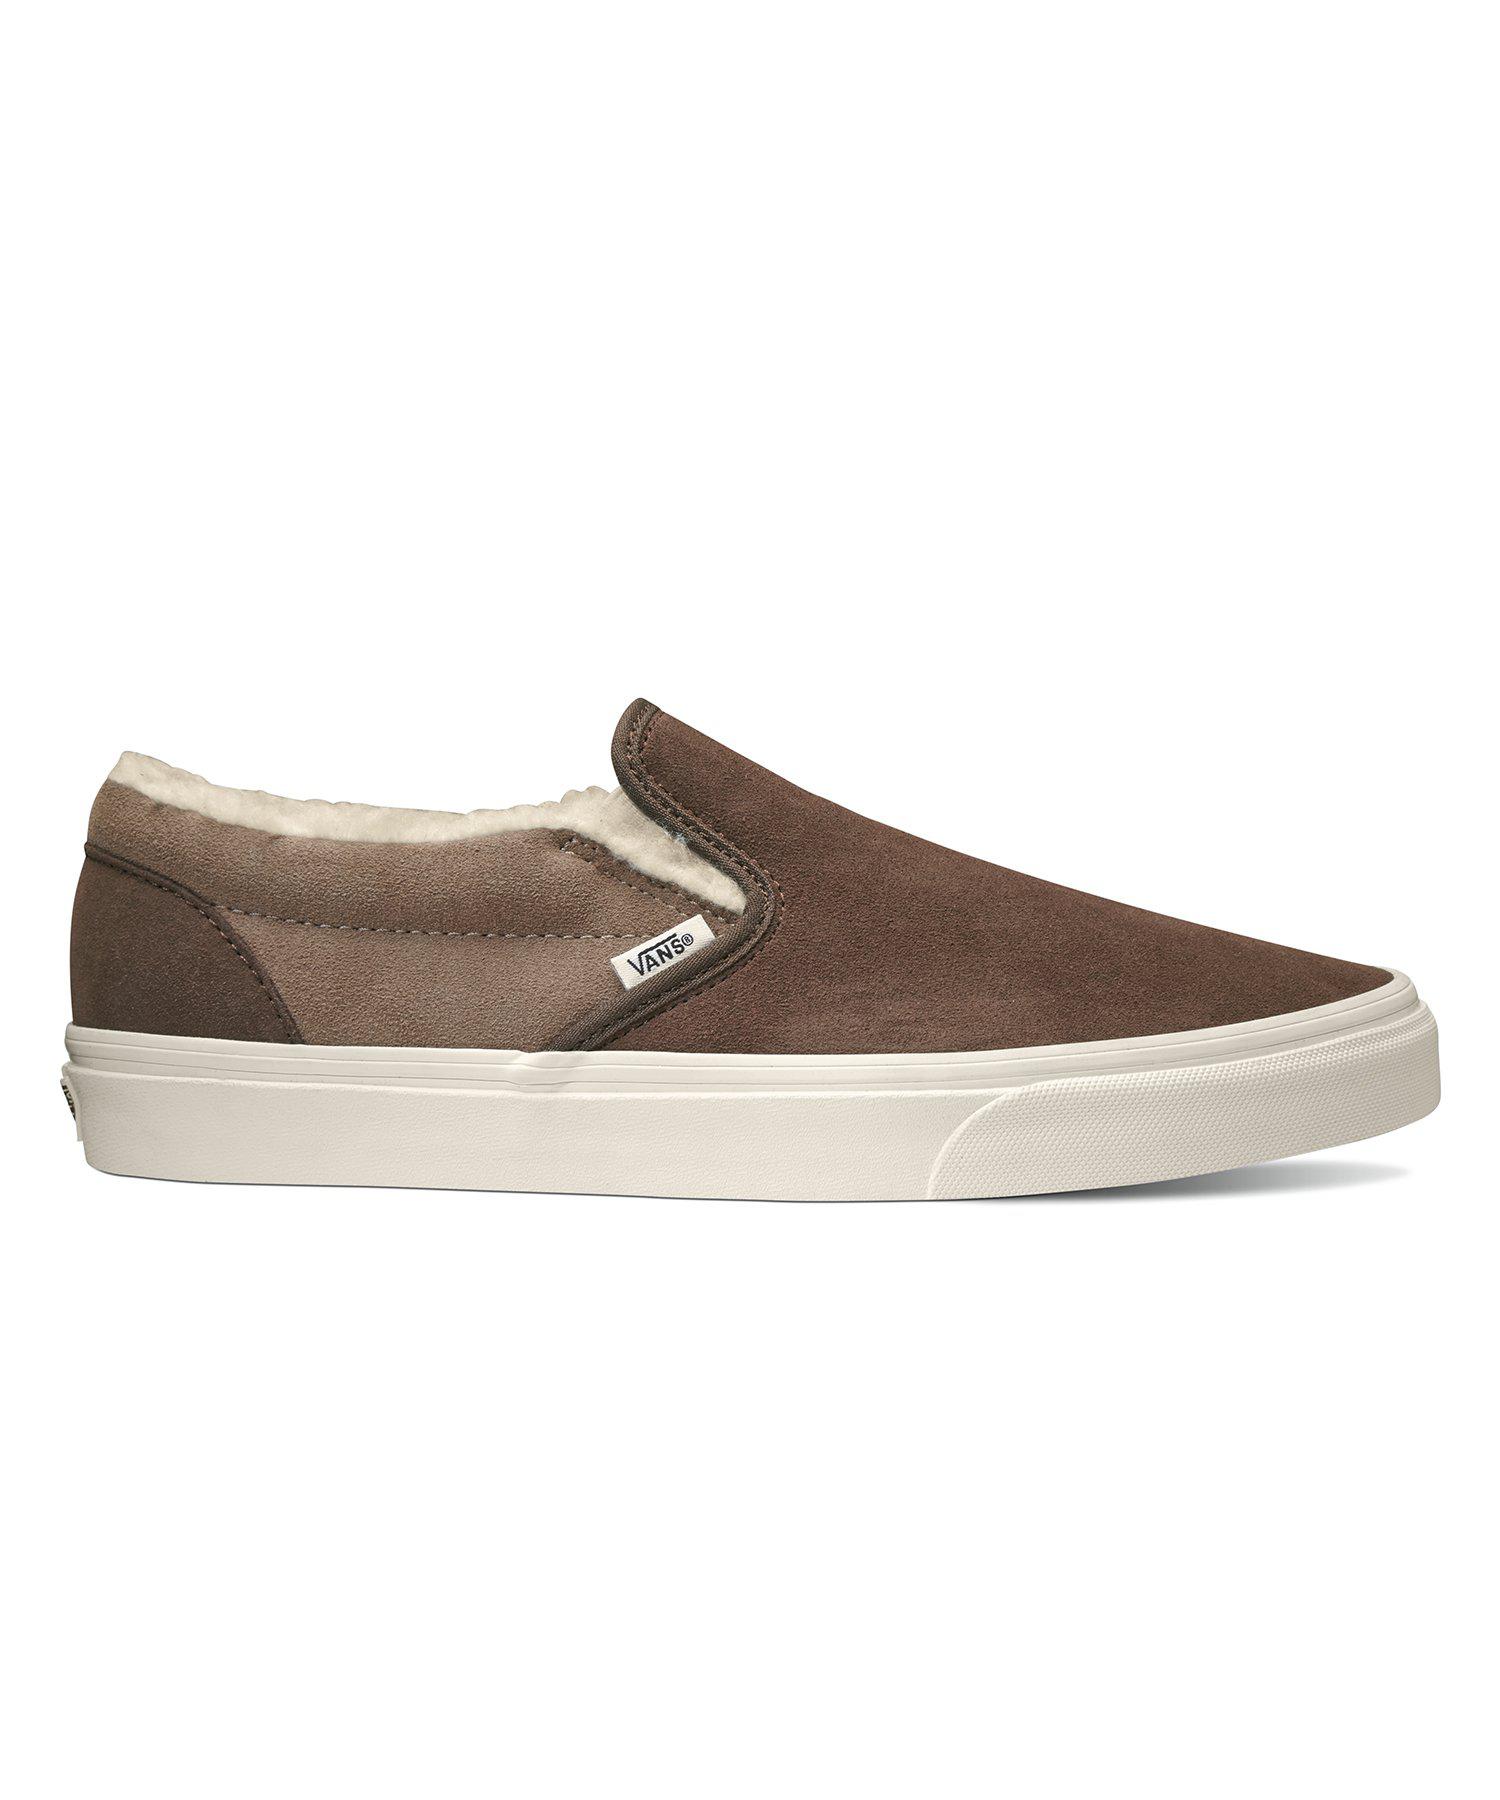 Vans Suede And Sherpa Classic Slip-on Sneakers,brown for Men - Lyst